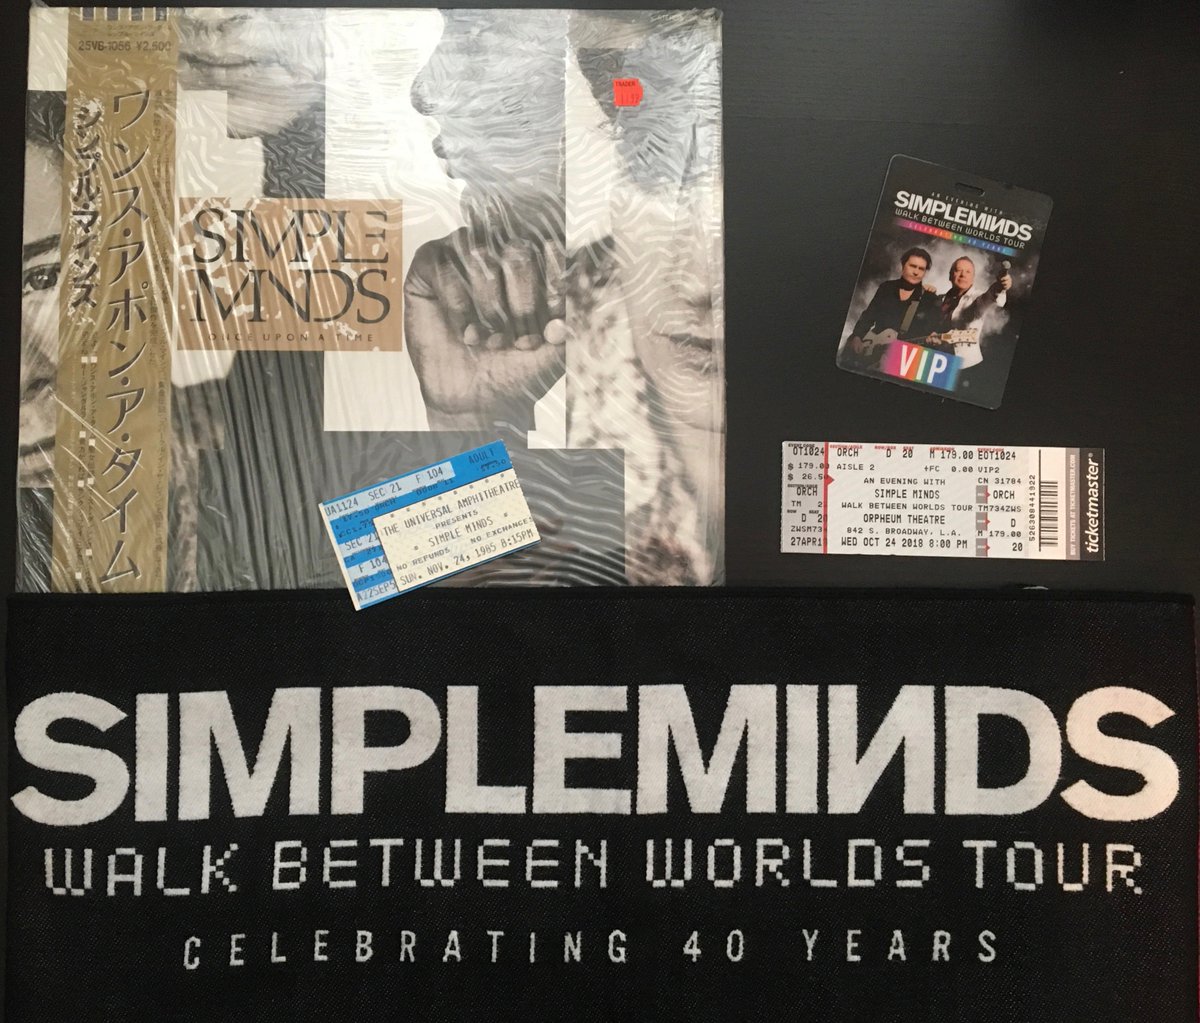 How crazy/fortunate to realize that you not only got to see your favorite bands @U2 @thealarm @simplemindscom perform consistently for so many years, but after 30-35 years to STILL be able to see them all in the same year. #rejoice #marchingon #bigmusic @atu2 @u2gigs @LHSUK